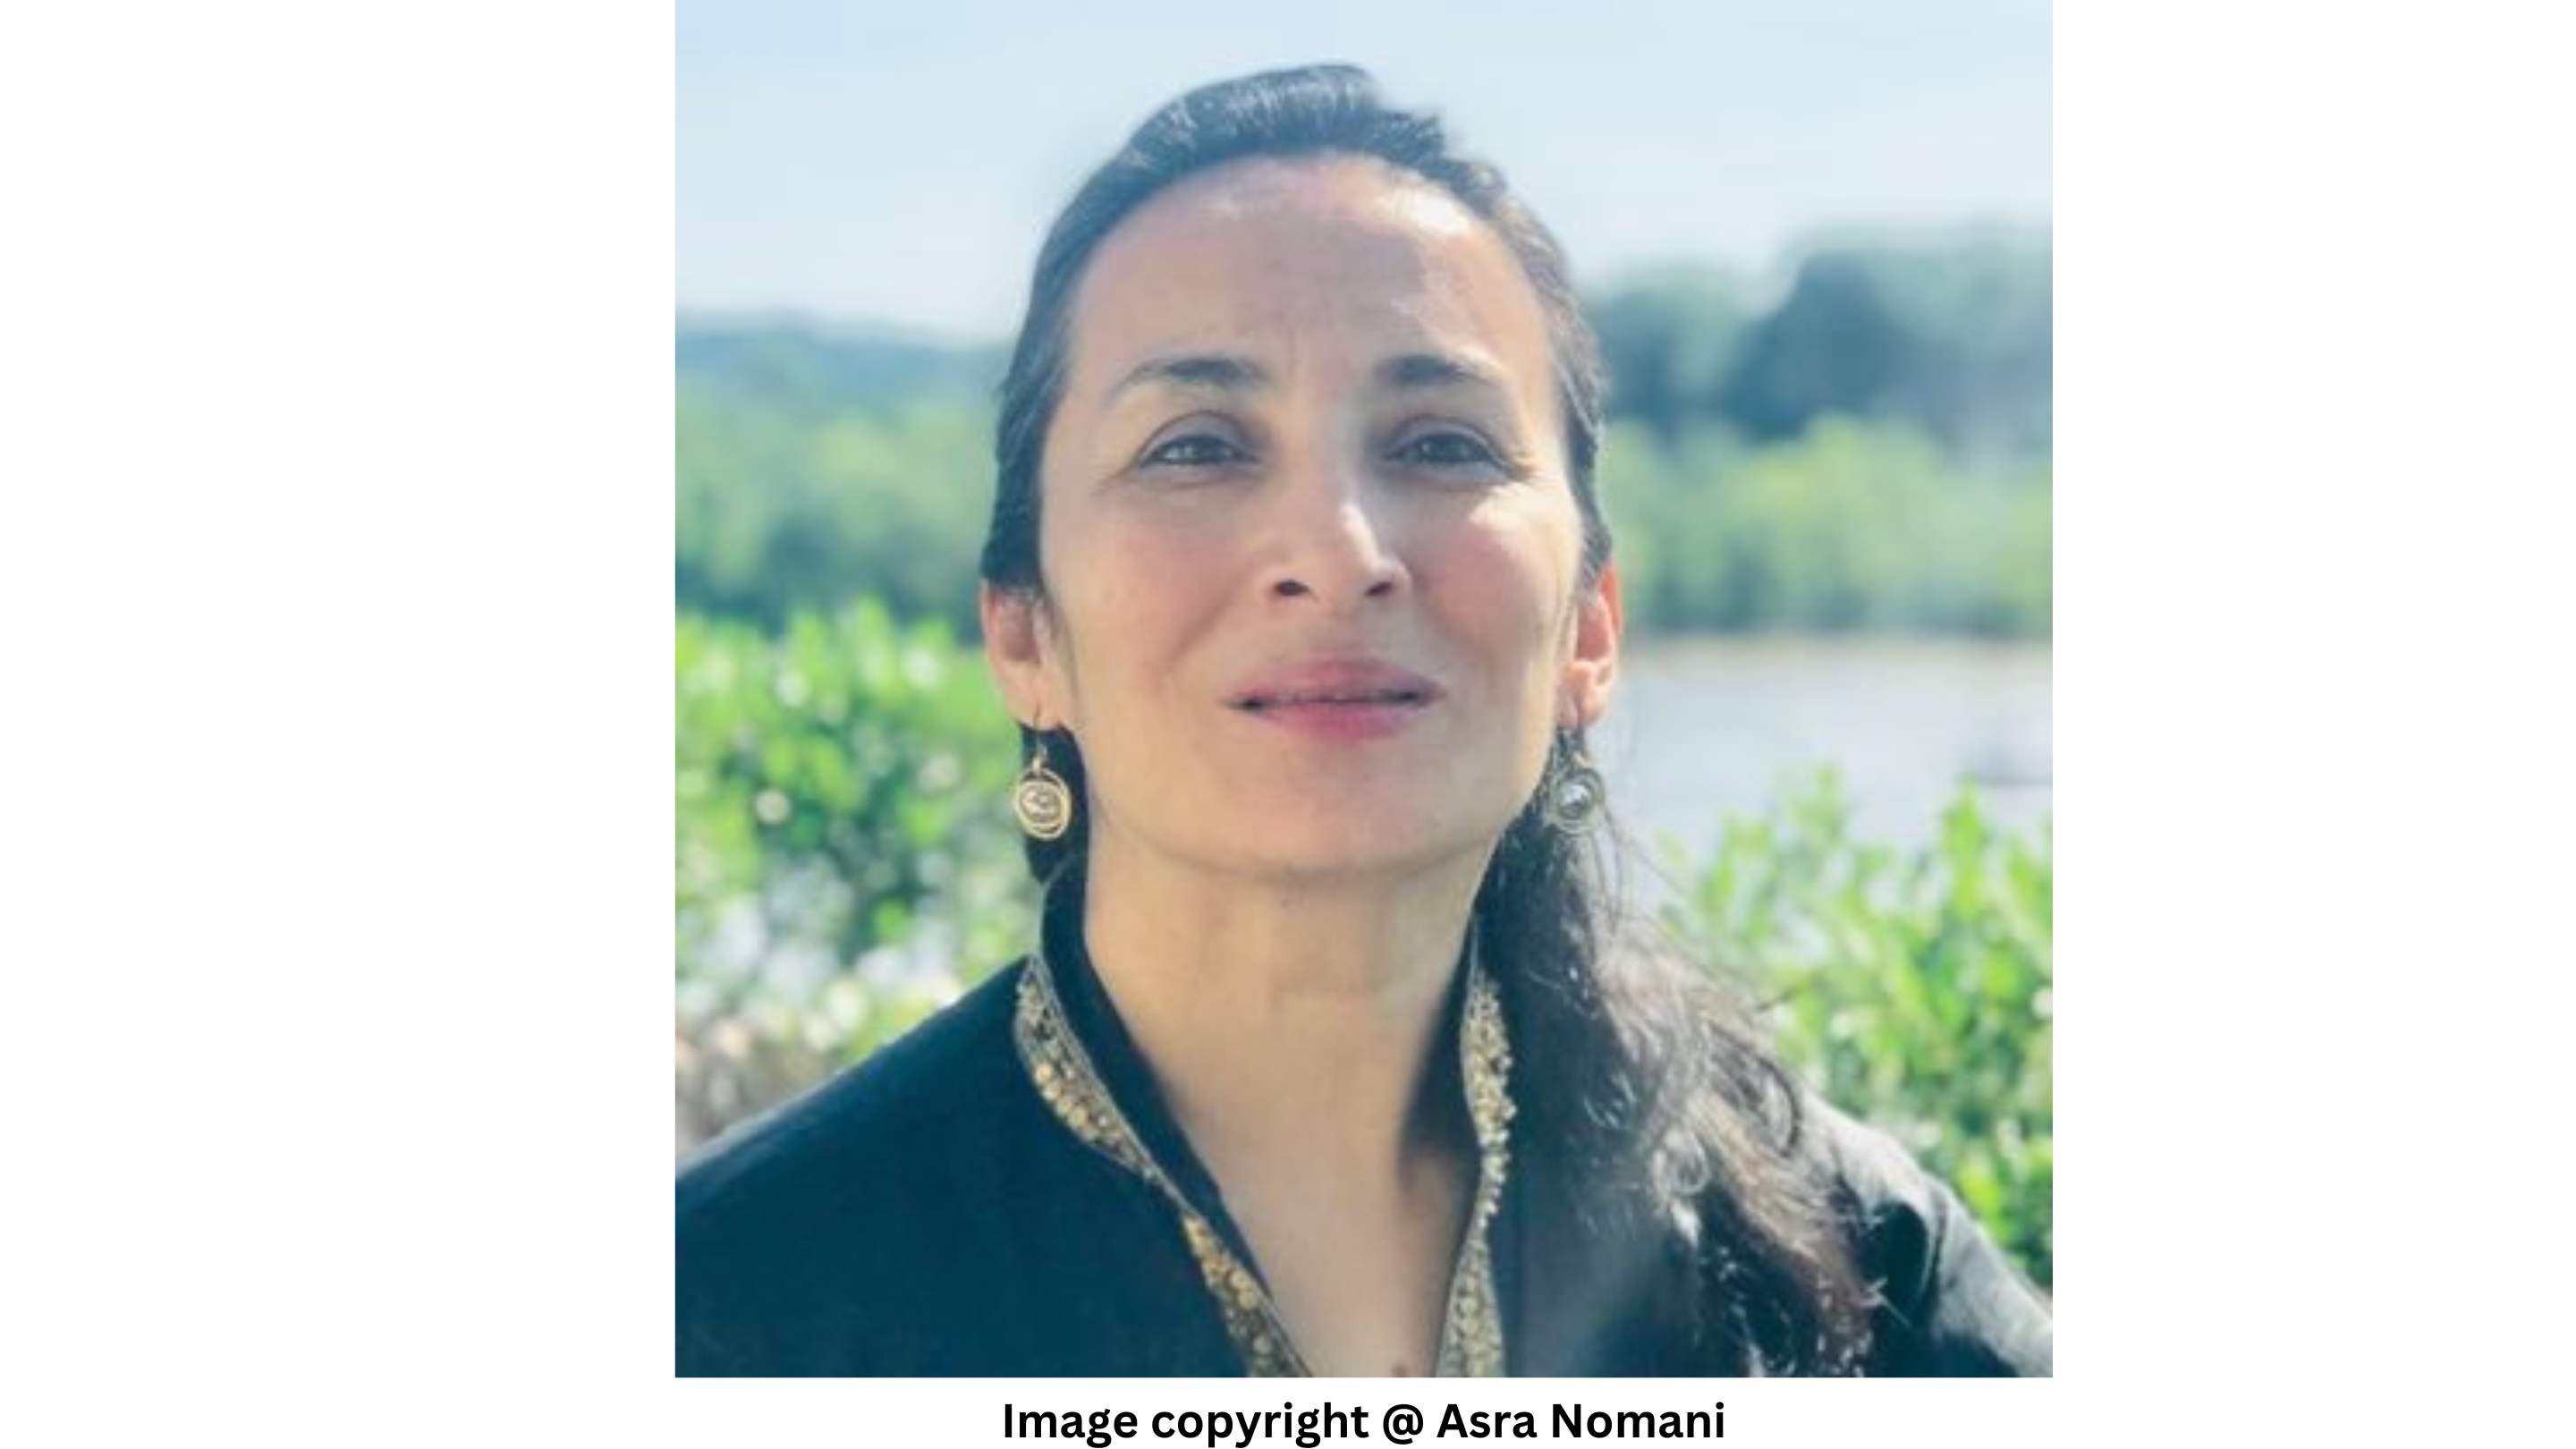 From journalist to leading activist, Asra Nomani